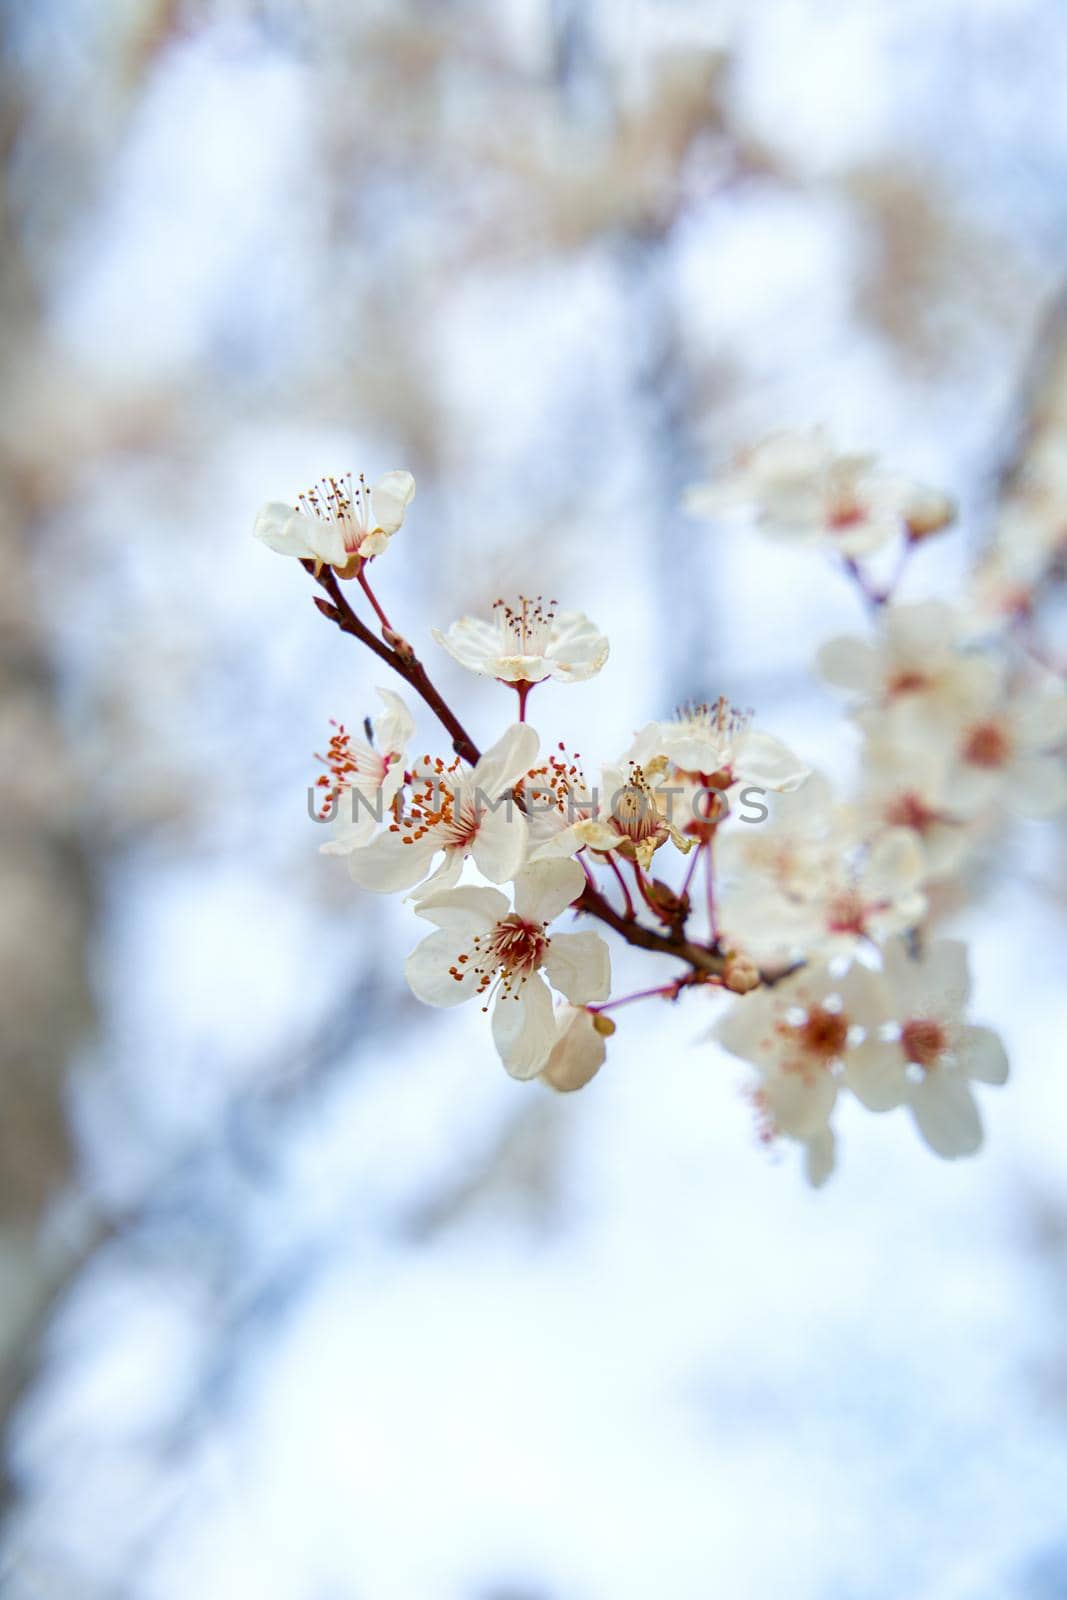 Apricot trees bloom with white flowers in early spring by Try_my_best